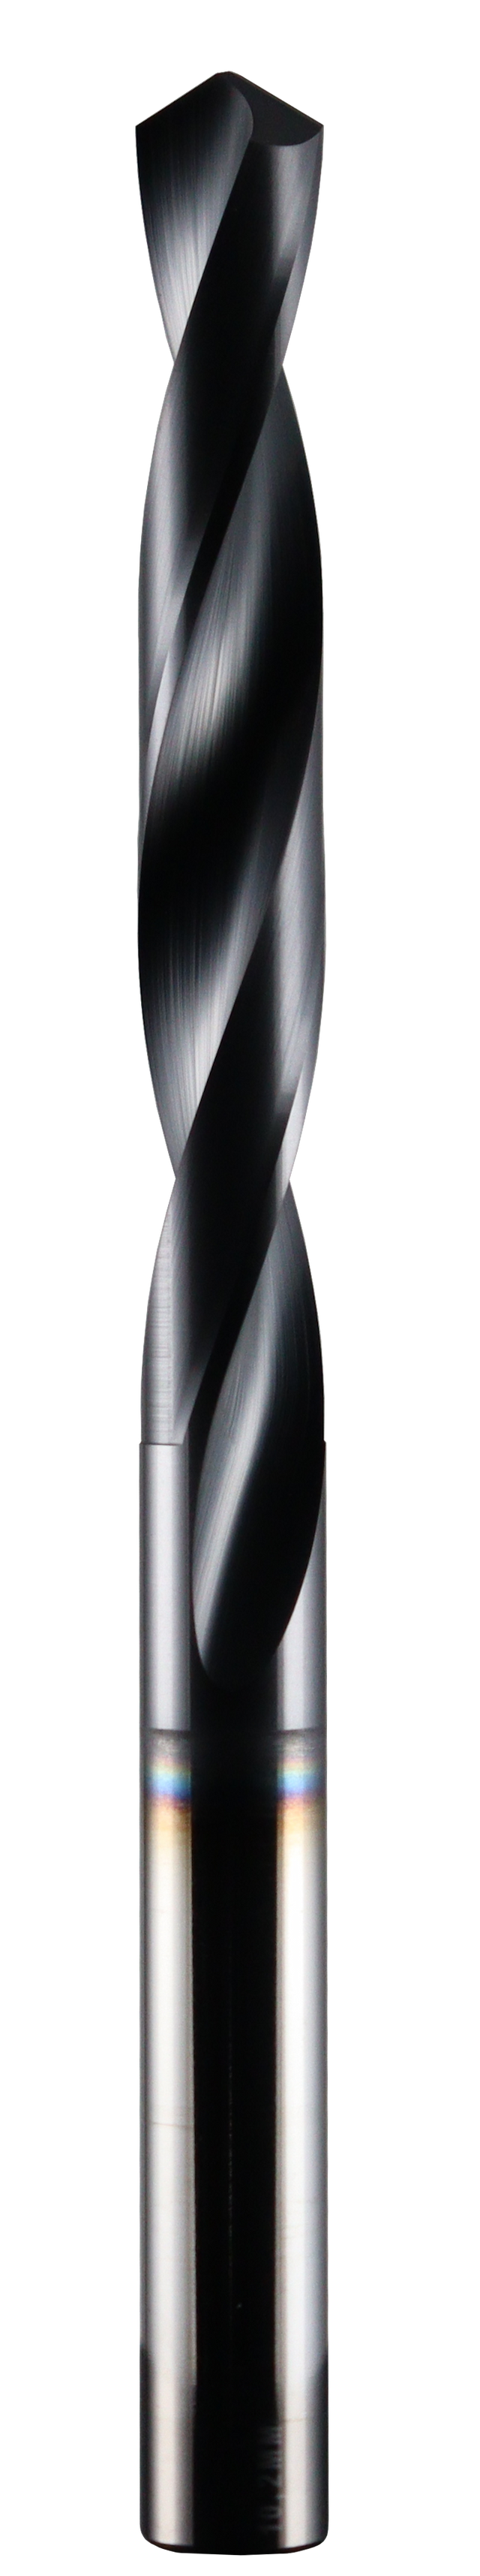 Letter Q, 118 Degree Point, Solid Carbide Drill - 57193